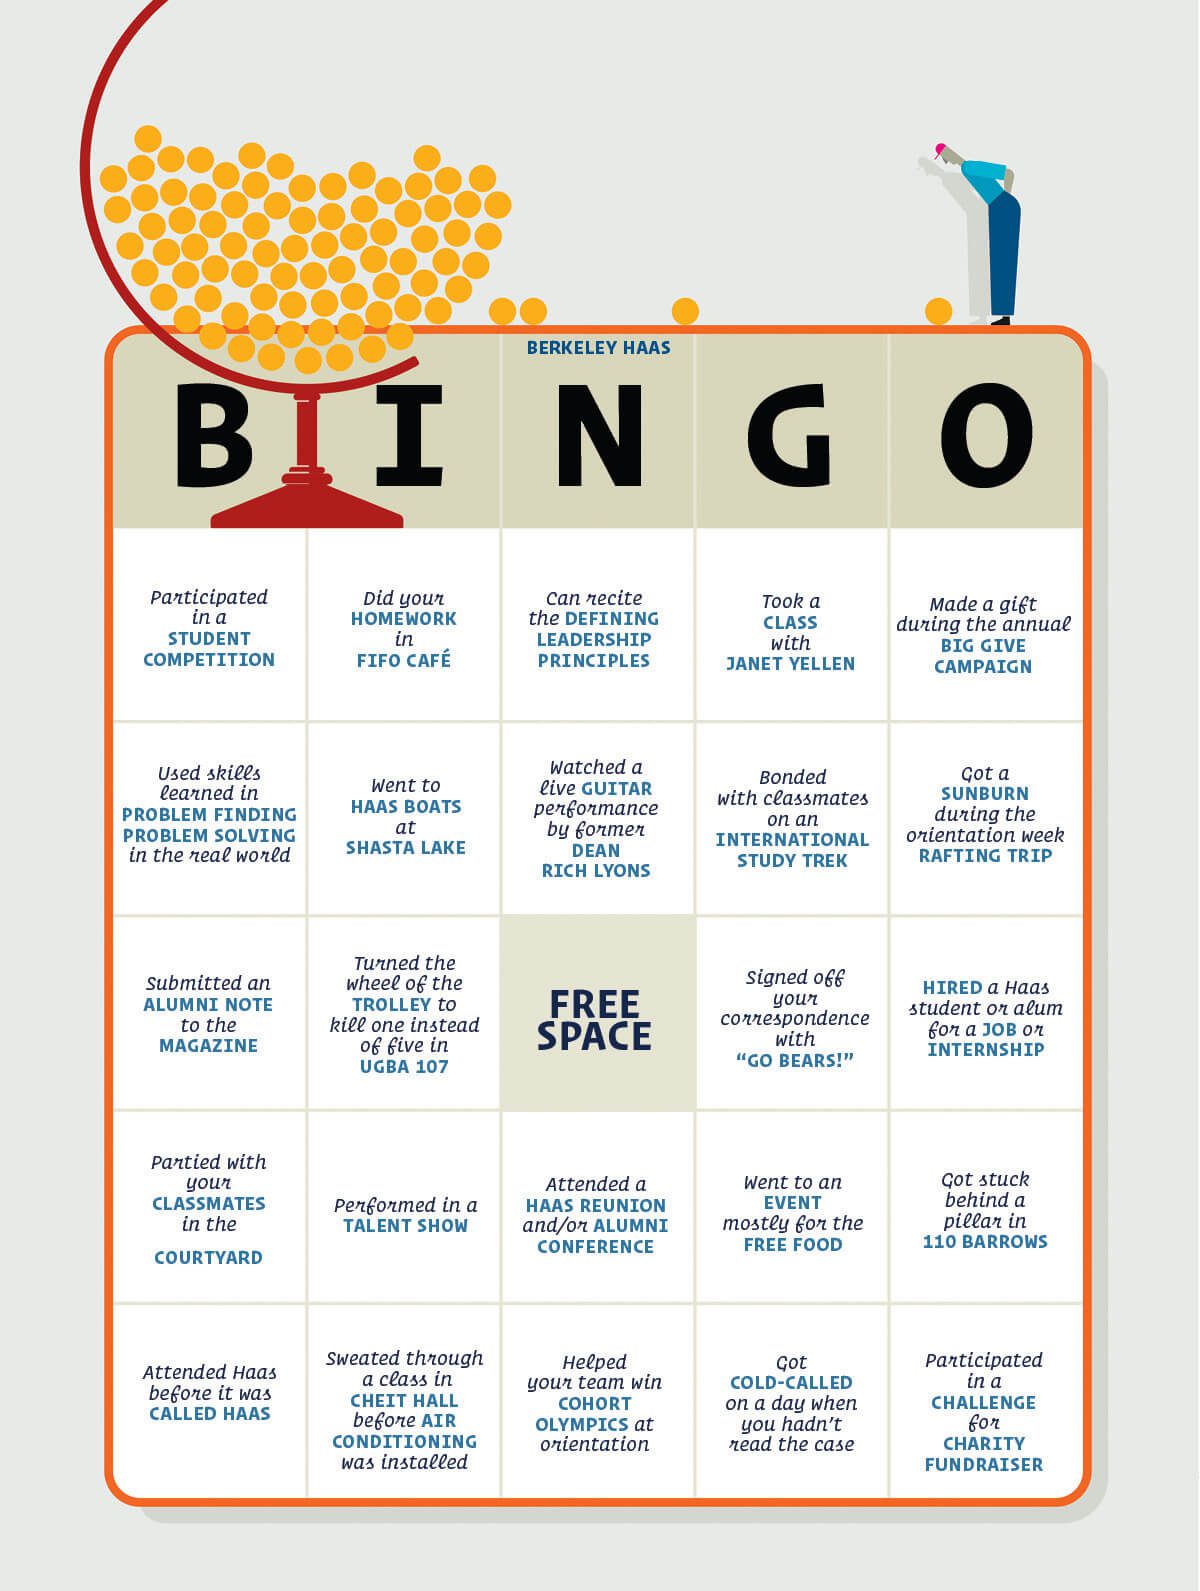 A Bingo card with Berkeley Haas-specific entries. The five items under B are: Participated in a student competition, Used skills learned in Problem Finding Problem Solving in the real world, Submitted an alumni note to the magazine, Partied with your classmates in the courtyard, and Attended Haas before it was called Haas. The five items under I are: Did your homework in Fifo Café, Went to Haas Boats at Shasta Lake, Turned the wheel of the trolley to kill one instead of five in UGBA 107, Performed in a talent show, and Sweated through a class in Cheit Hall before air conditioning was installed. The five items under N are: Can recite the Defining Leadership Principles, Watched a live guitar performance by former Dean Rich Lyons, free space, Attended a Haas Reunion and/or Alumni Conference, and Helped your team win Cohort Olympics at orientation. The five items under G are: Took a class with Janet Yellen, Bonded with classmates on an international study trek, Signed off your correspondence with “Go Bears!”, Went to an event mostly for the free food, and Got cold-called on a day when you hadn’t read the case. The five items under O are: Made a gift during the annual Big Give competition, Got a sunburn during the orientation week rafting trip, Hired a Haas student or alum for a job or internship, Got stuck behind a pillar in 110 Barrows, and Participated in a Challenge for Charity fundraiser. 